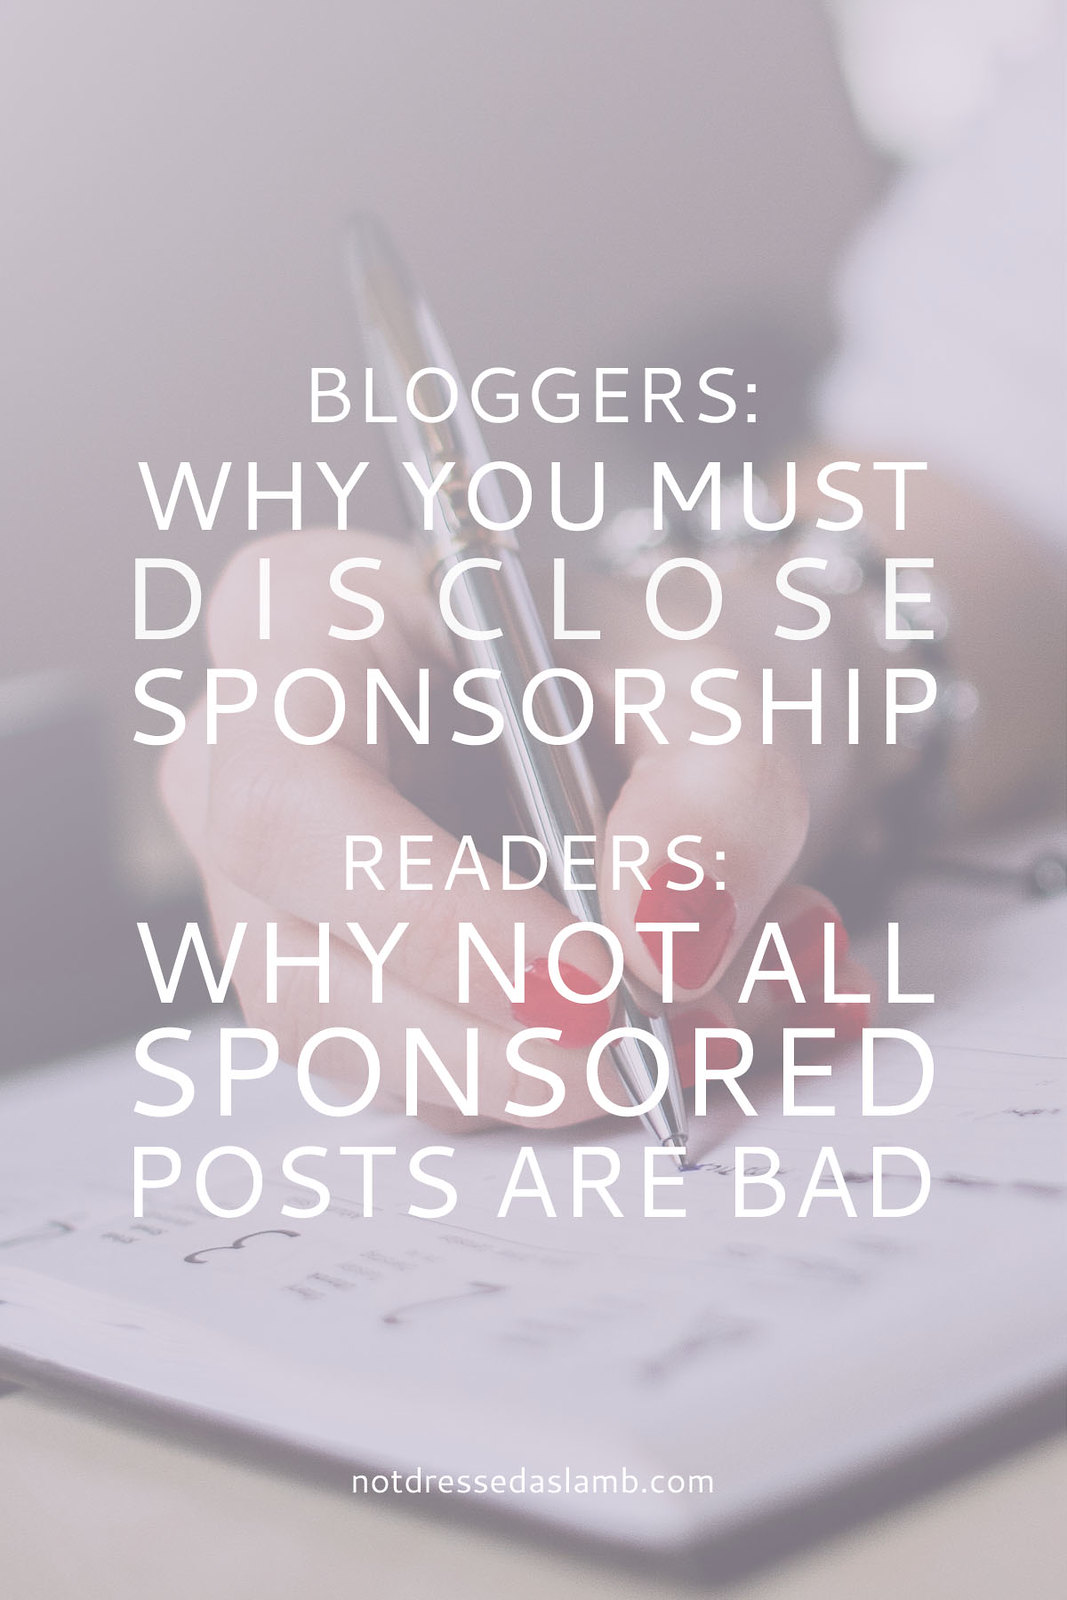 Bloggers: Why You Must Disclose Sponsorship, and Readers: Why Not All Sponsored Posts Are Bad | Not Dressed As Lamb